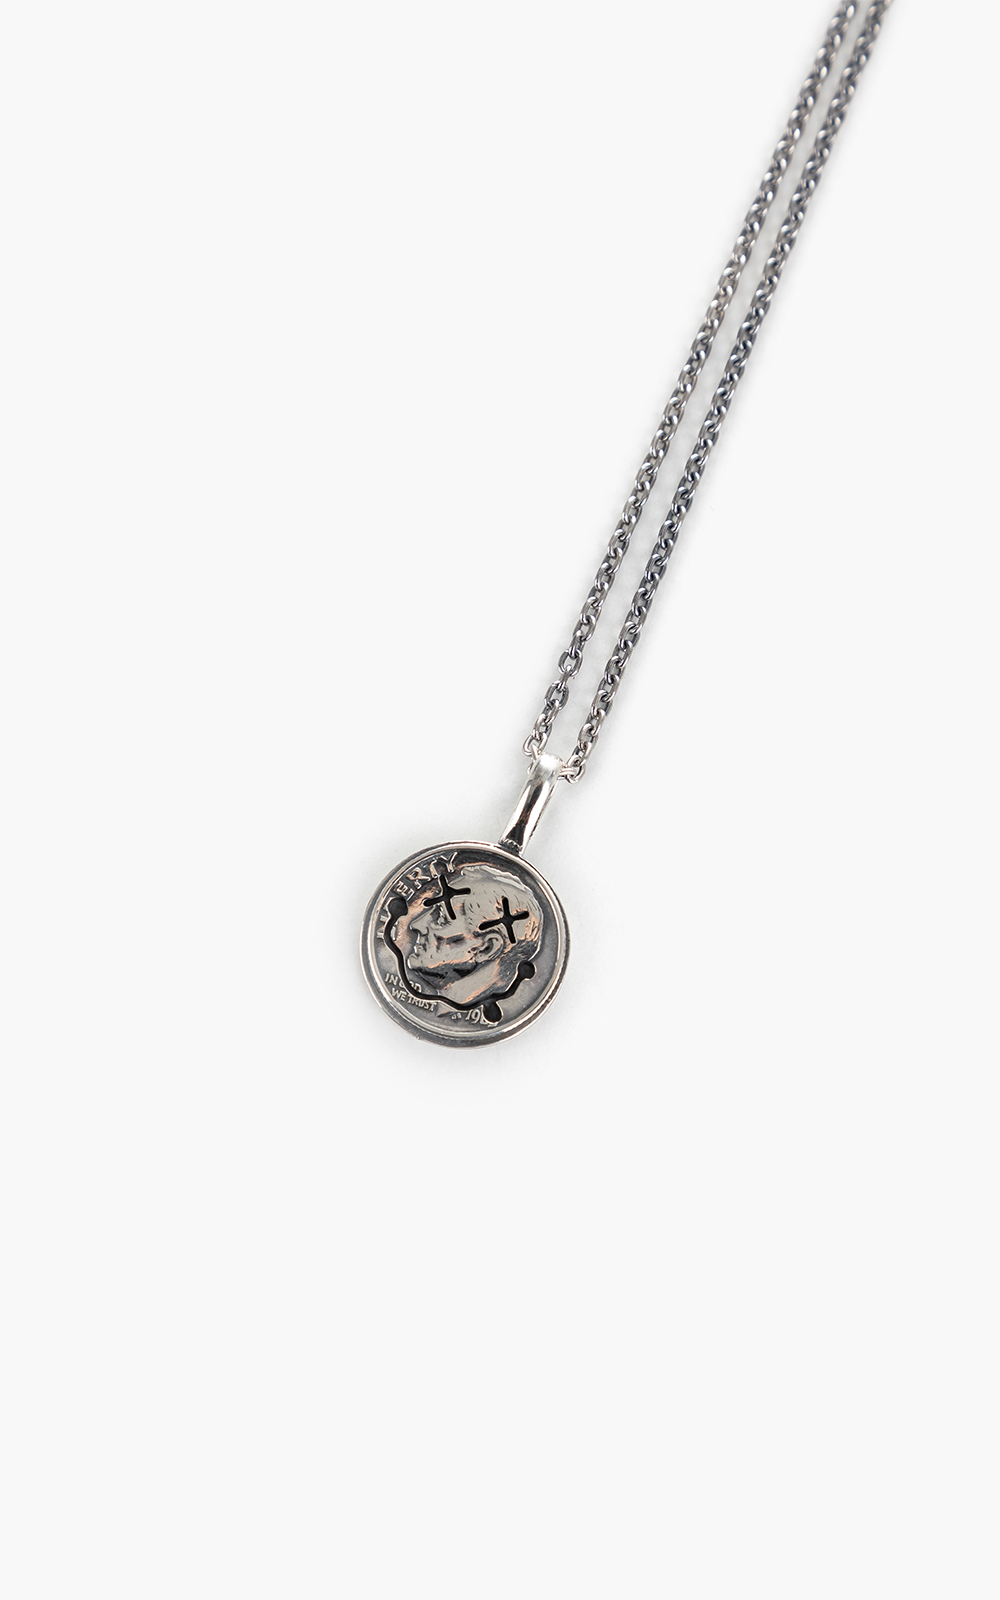 North Works N-603B Smile Necklace 925 Silver | Cultizm